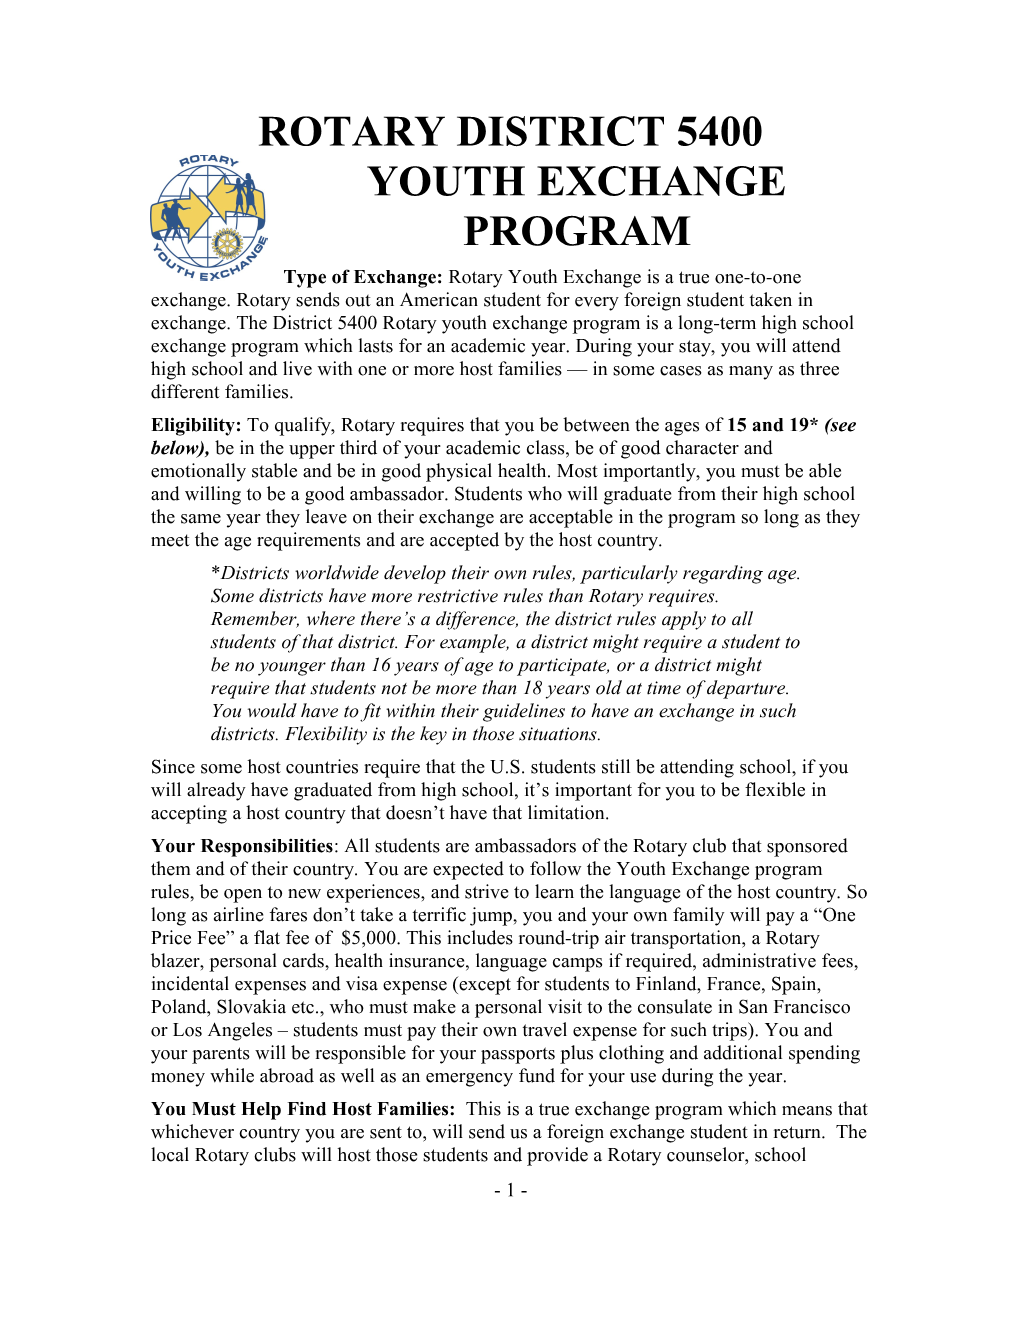 Rotary District 5400 Youth Exchange Program